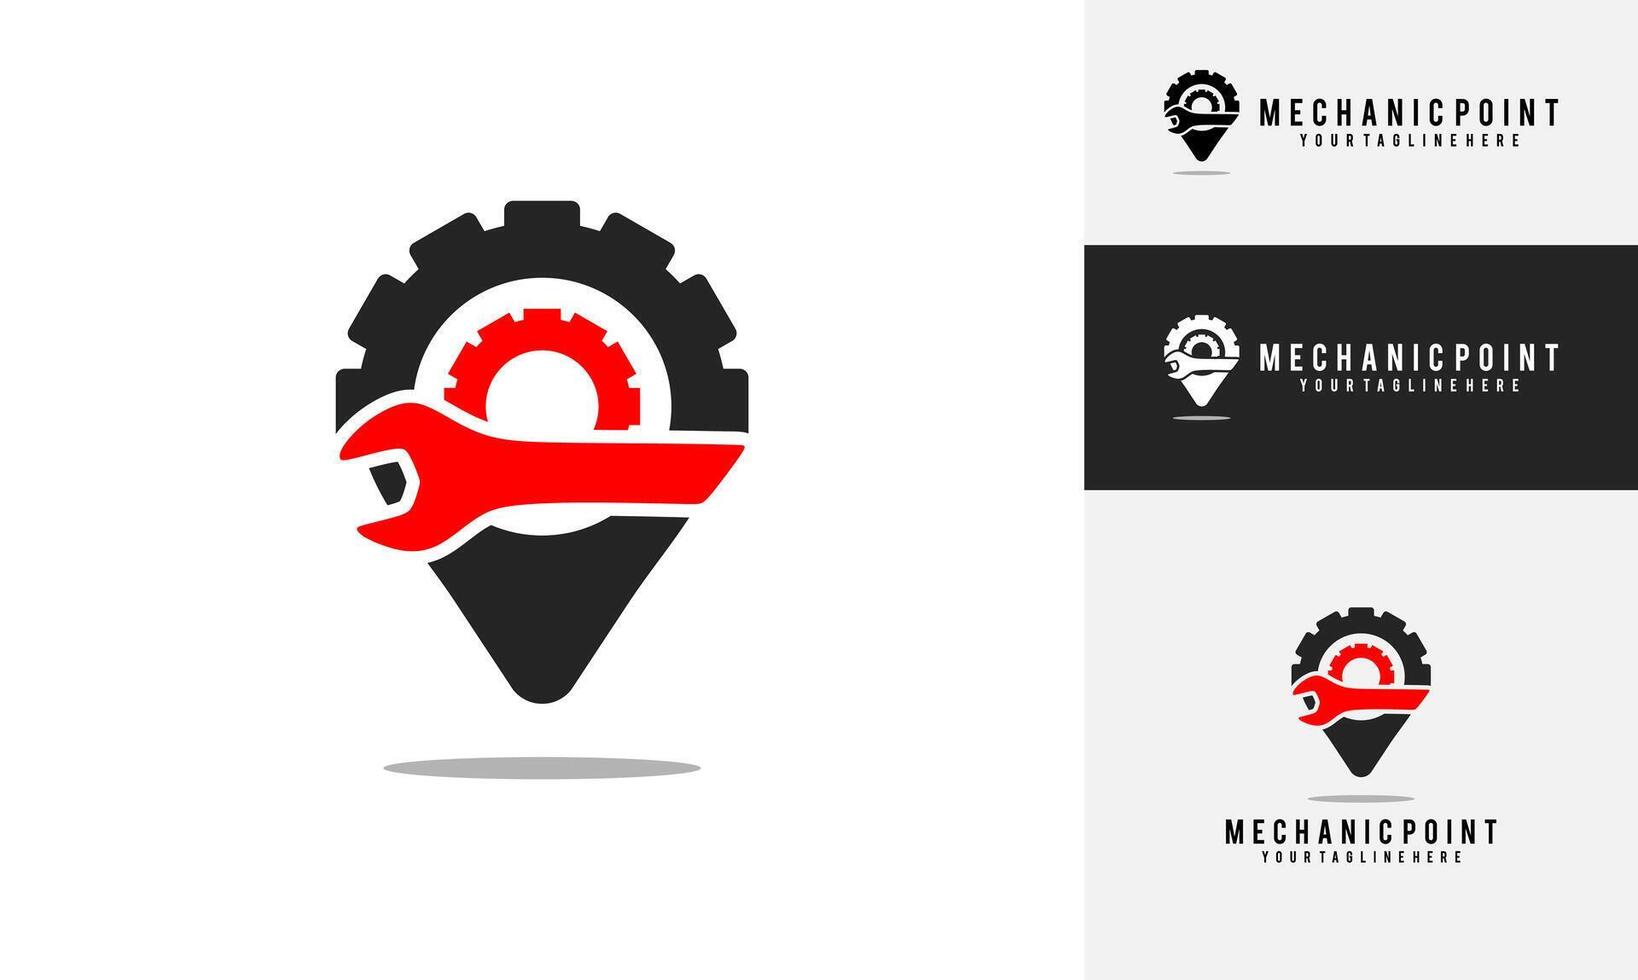 mechanic point logo design. point and mechanic logo, simple design vector illustration. good for use in mechanical businesses